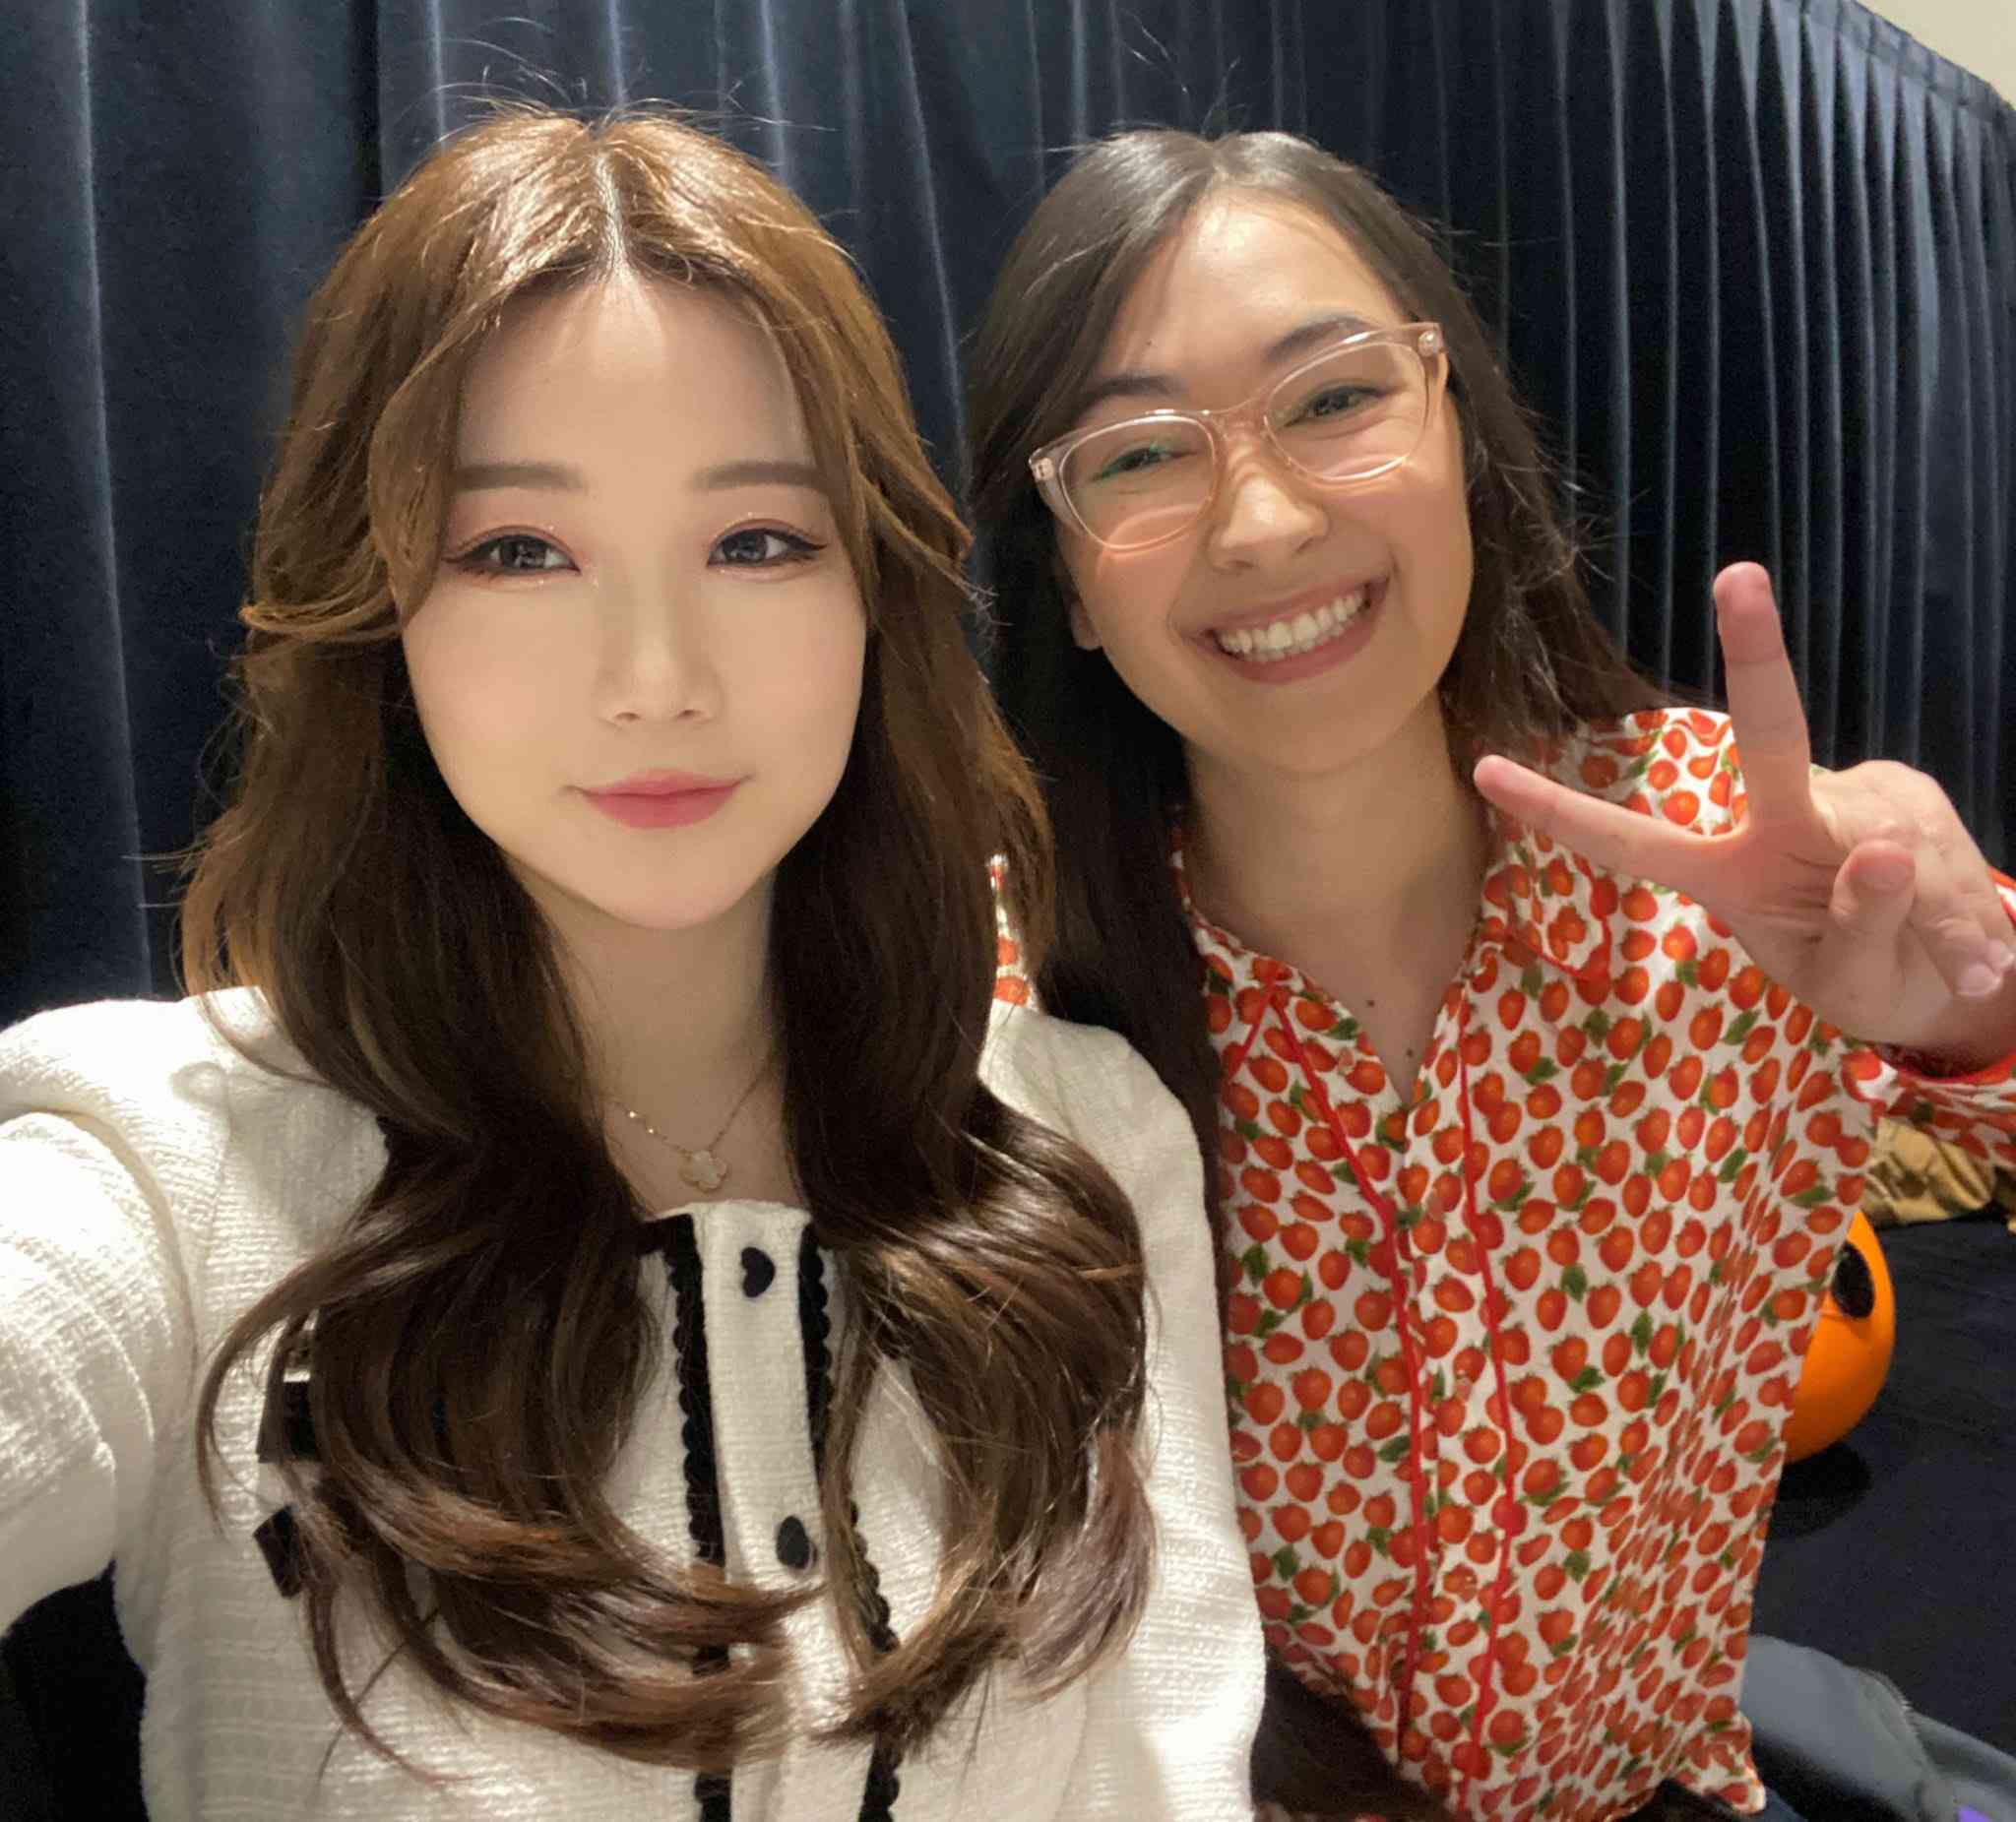 Kitty with Ovilee during DreamHack Melbourne 2022 (Credit: Kitty/Twitter)